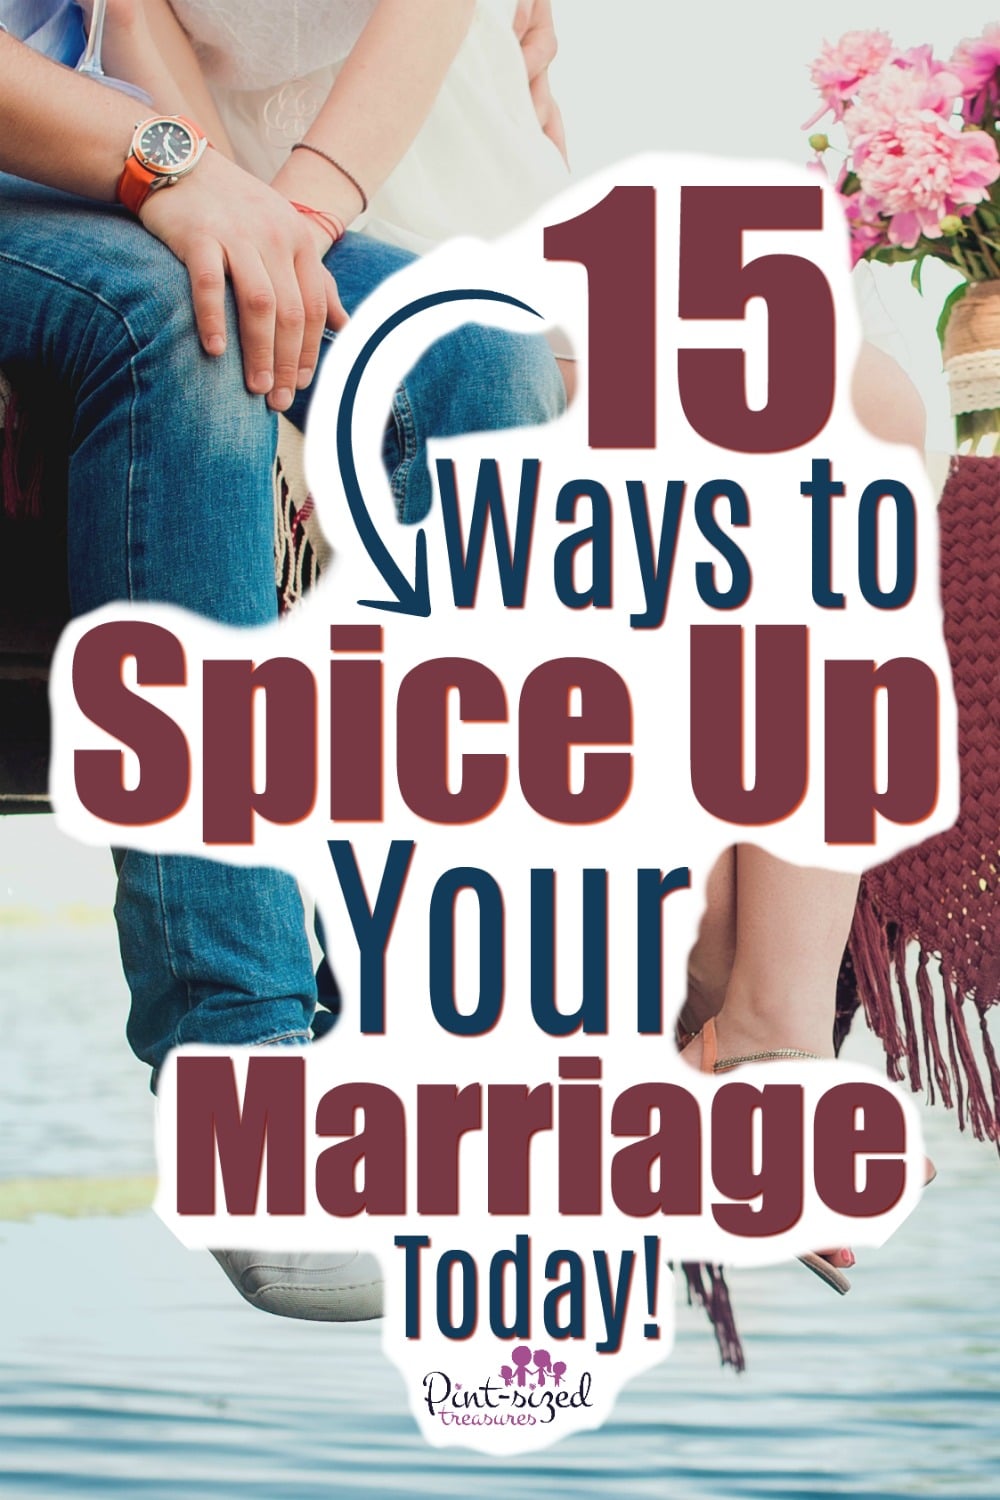 Up acts to relationship spice a 7 Ways